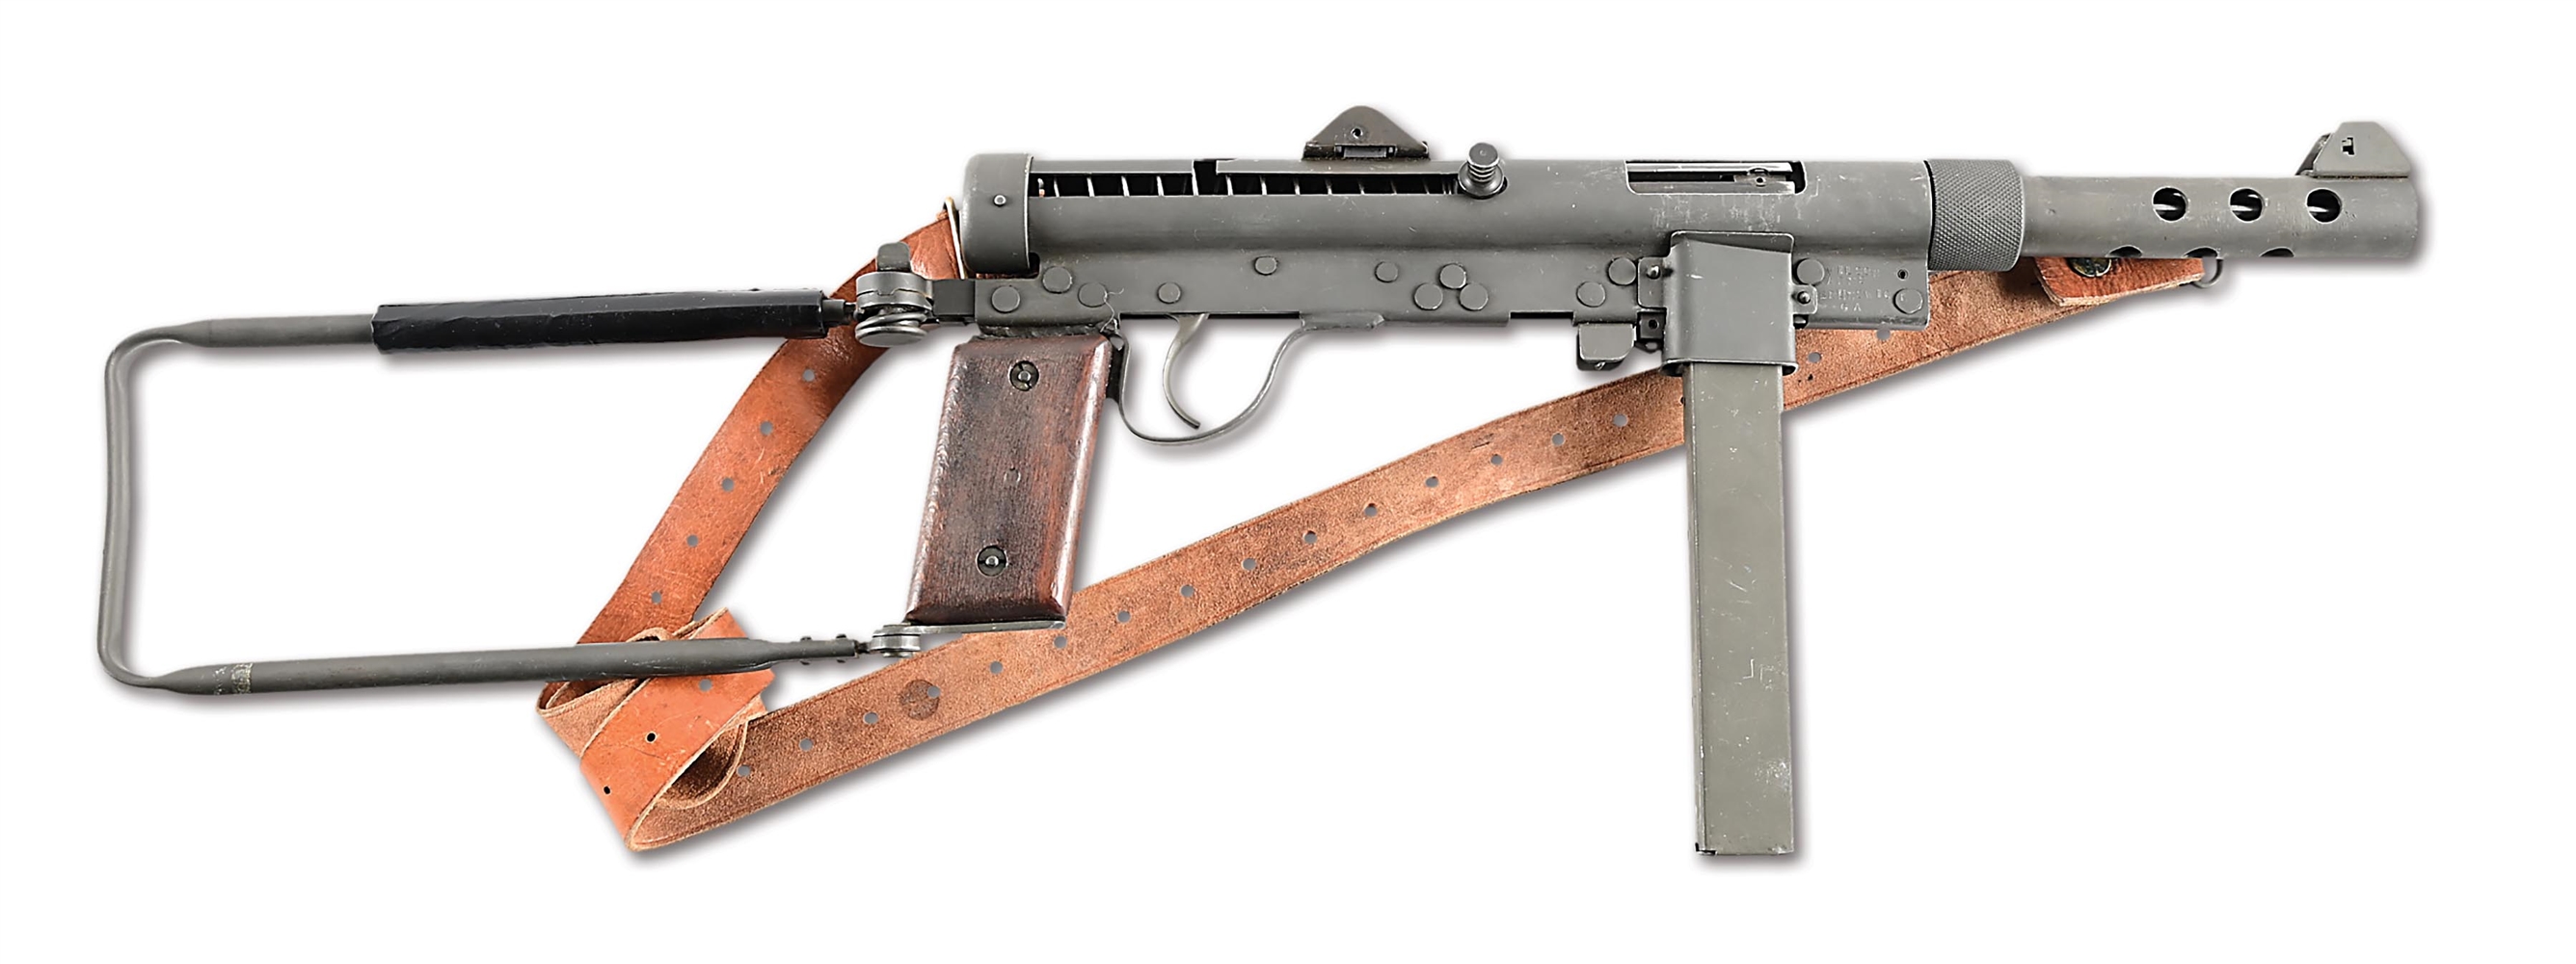 (N) WILSON REGISTERED SWEDISH CARL GUSTAF M/45 SUBMACHINE GUN WITH NUMEROUS ACCESSORIES (FULLY TRANSFERABLE).